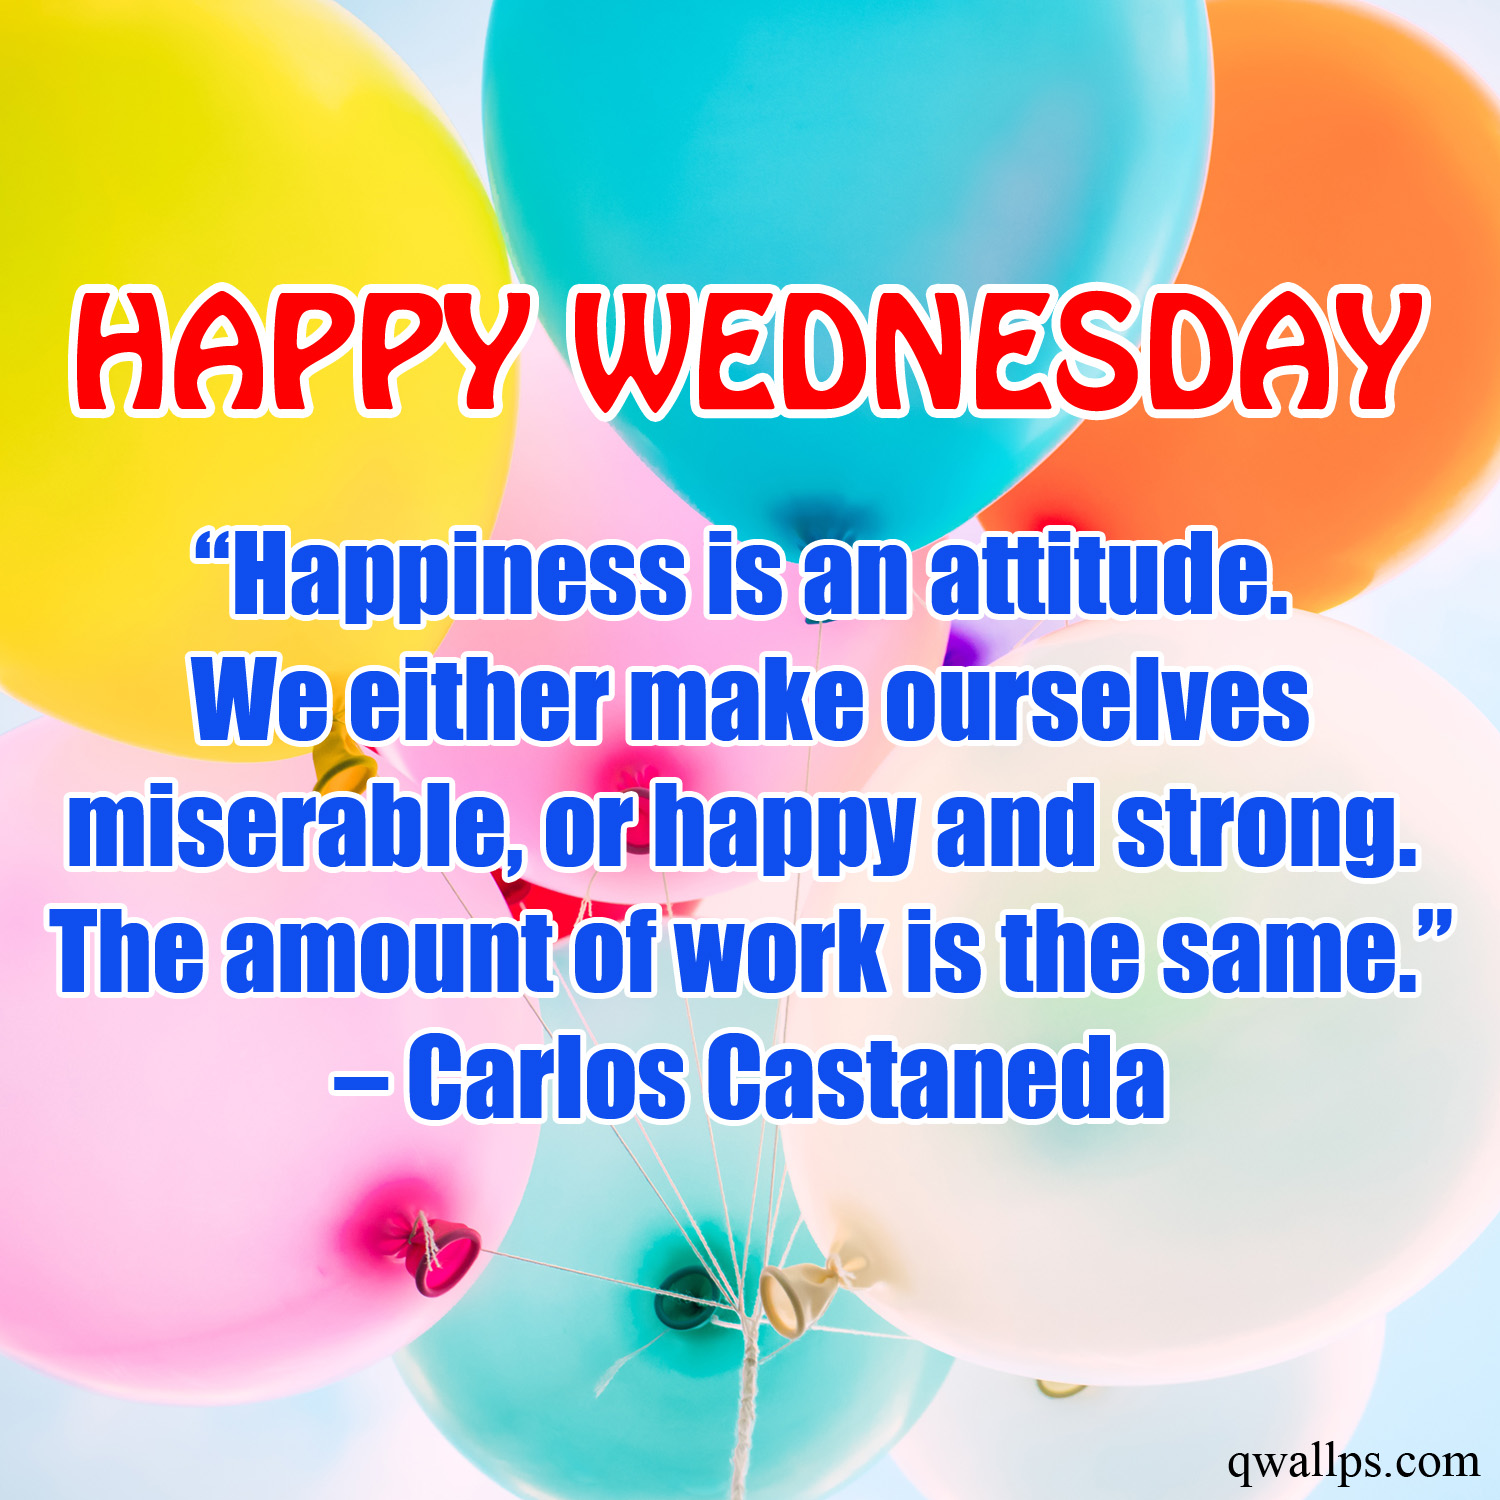 Best Wednesday Thought Quotes Wallpaper 07 is an attitude Wallpaper. Desktop Background. Mobile Phone Wallpaper